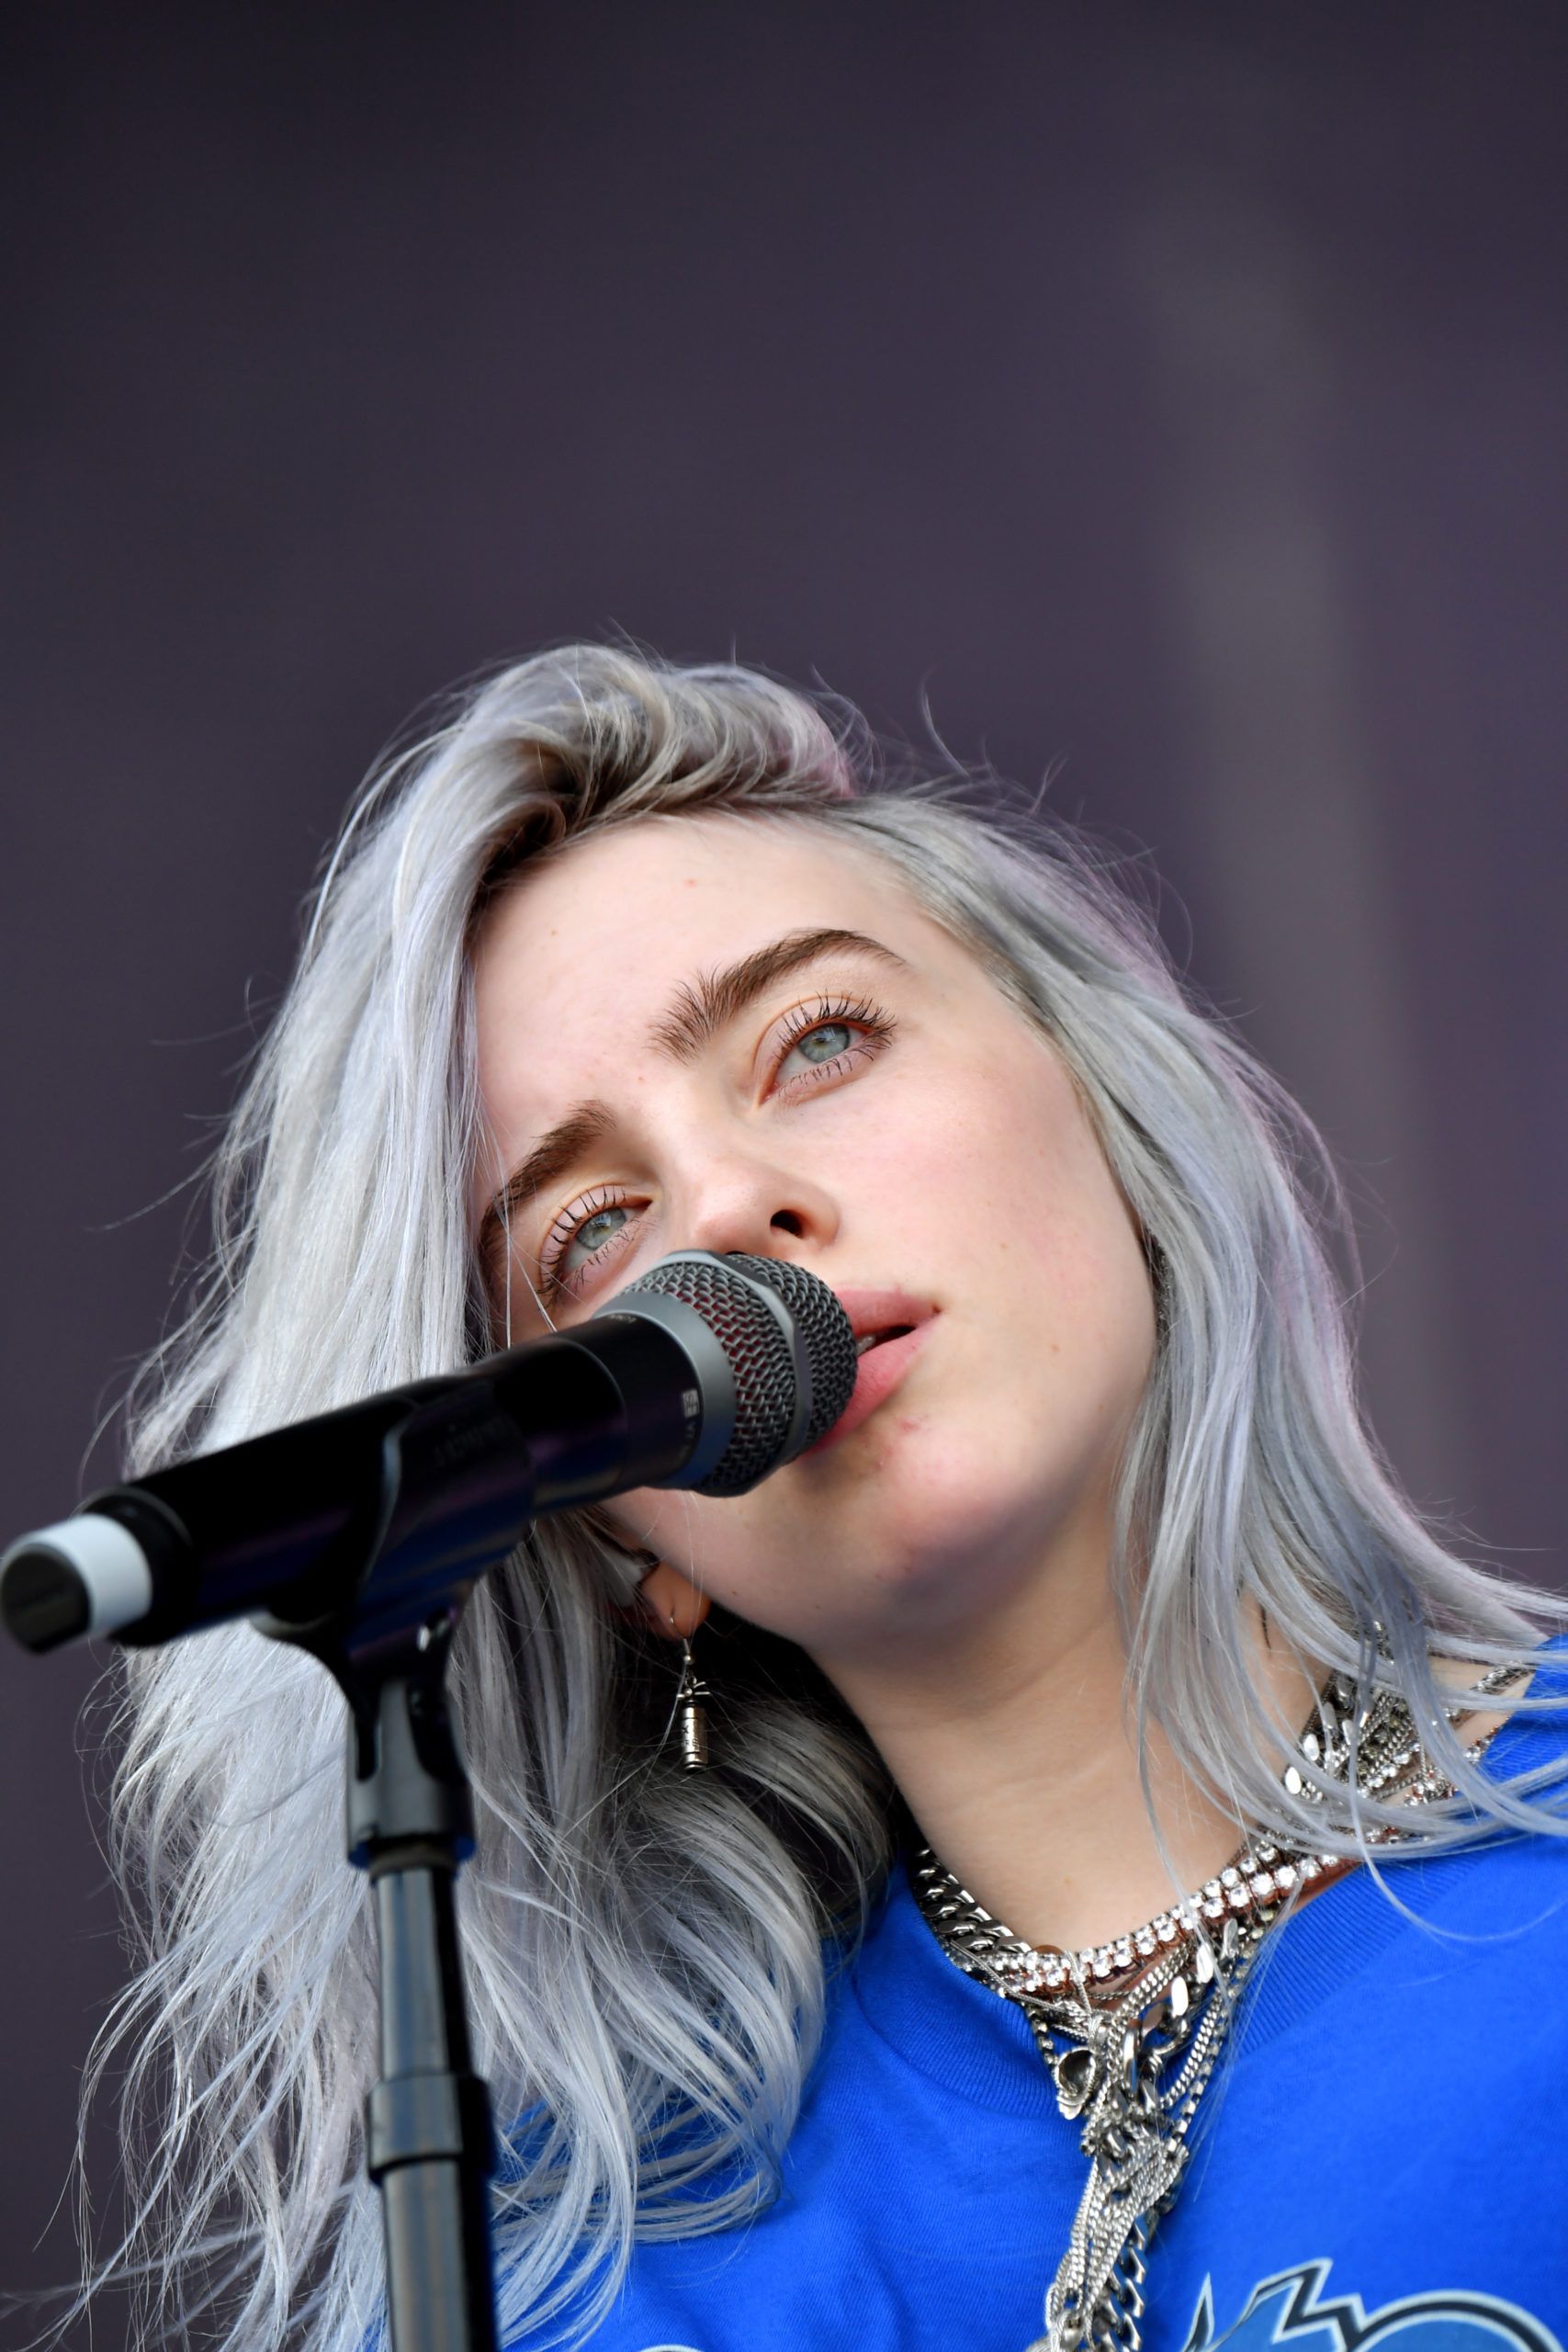 Billie Eilish 17 Year Old with Blue Hair and Tourettes Syndrome Will  Have the Number 1 Album This Week  Showbiz411